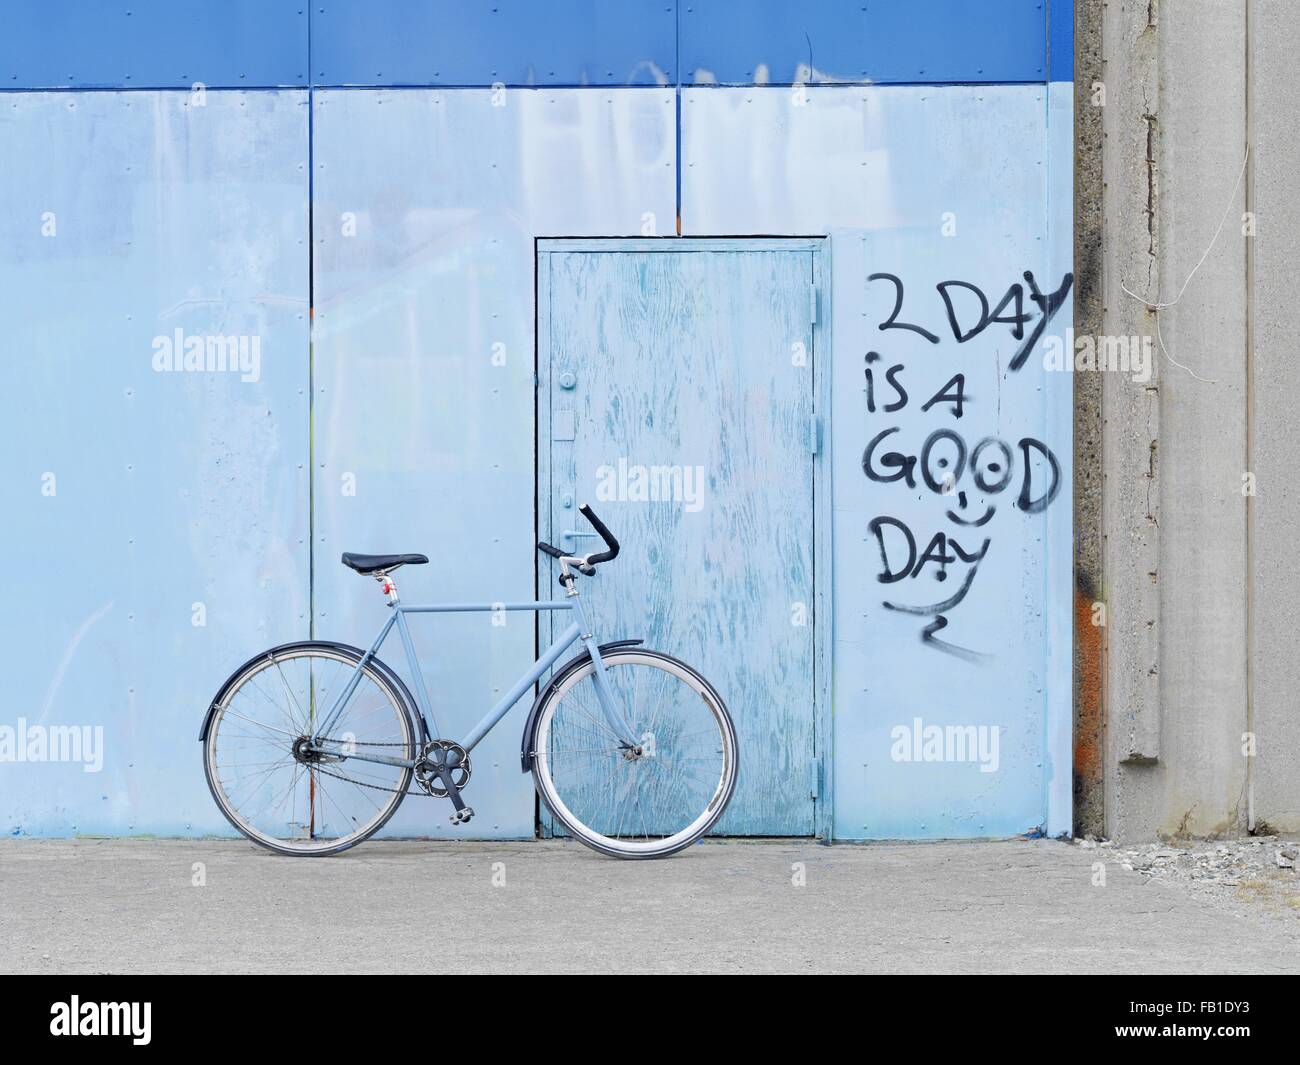 Bicycle parked against graffiti wall Stock Photo